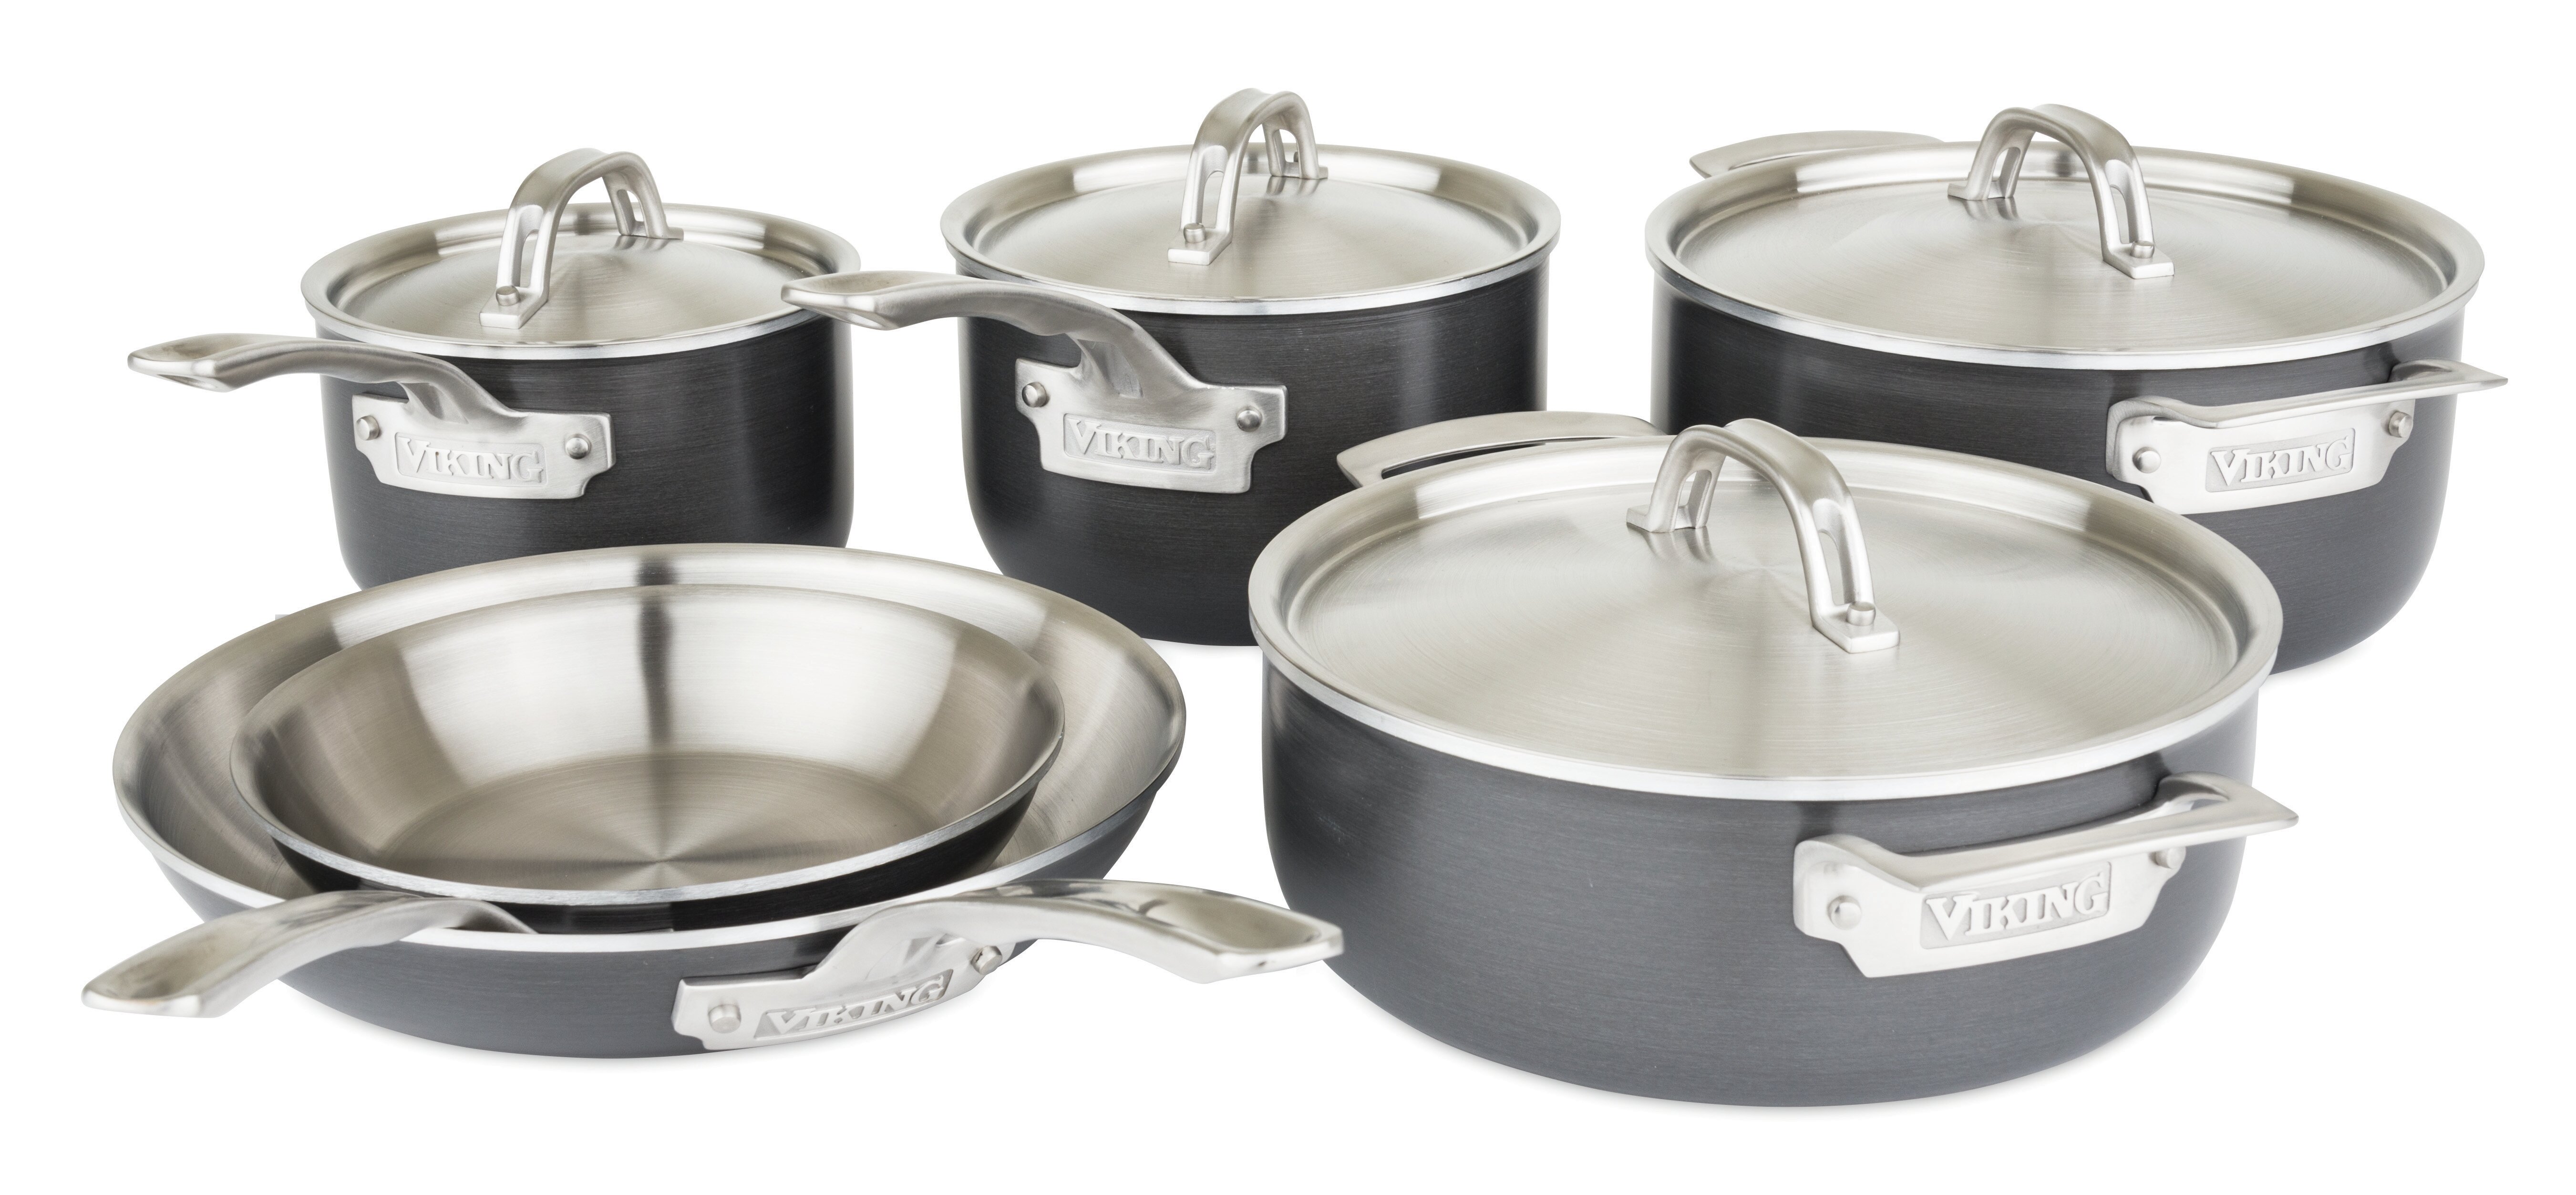 Viking Professional 5-Ply Stainless Steel Cookware Set, 10 Piece - The  Luxury Home Store